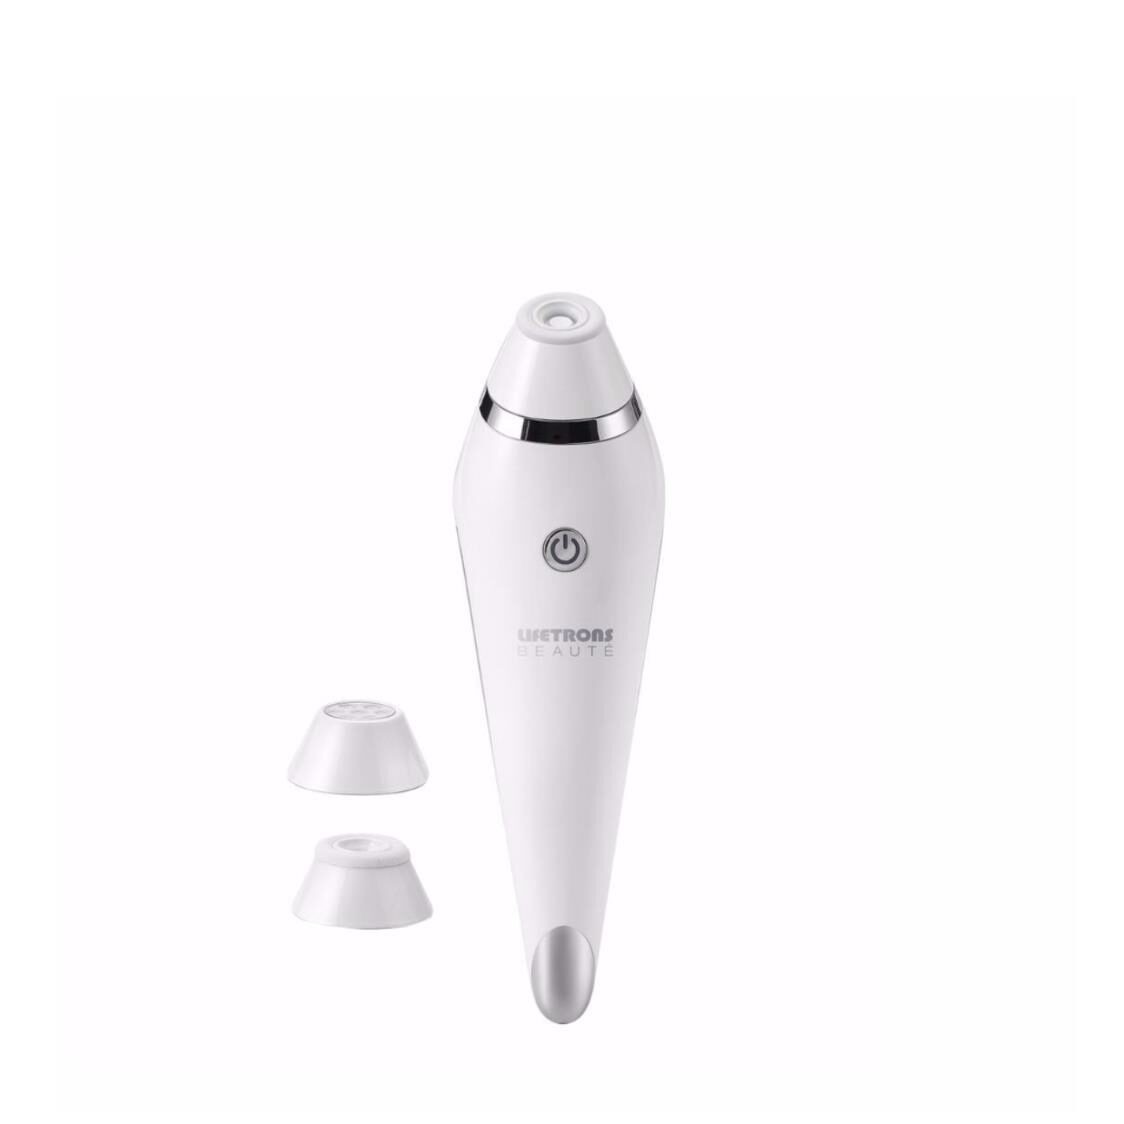 Lifetrons Micro-Dermabrasion Facial with Anti-Acne  Skin Resurfacing Technology CM-300